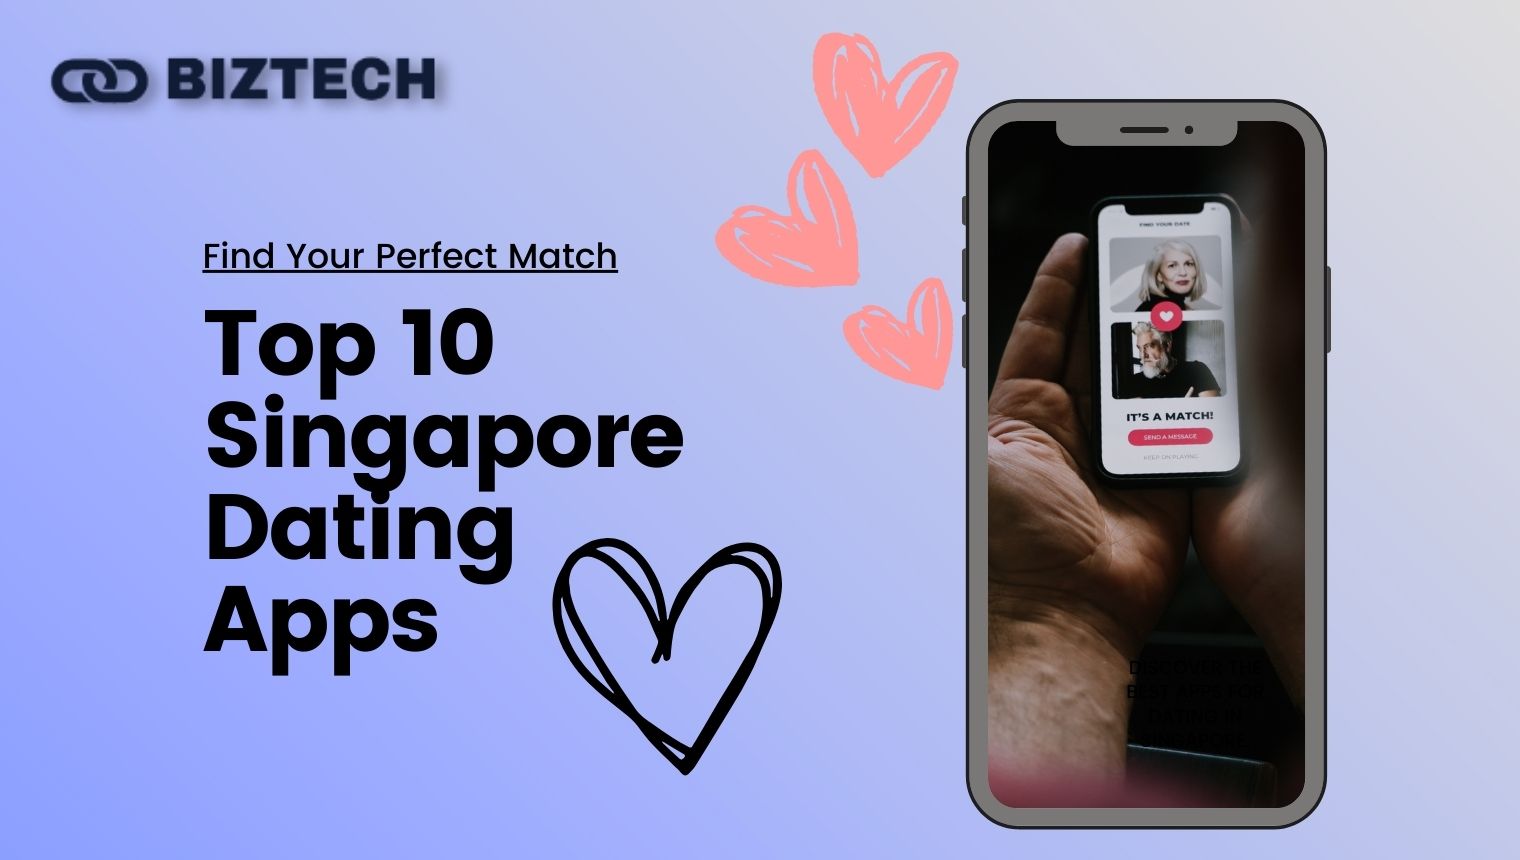 Top 10 Singapore Dating Apps